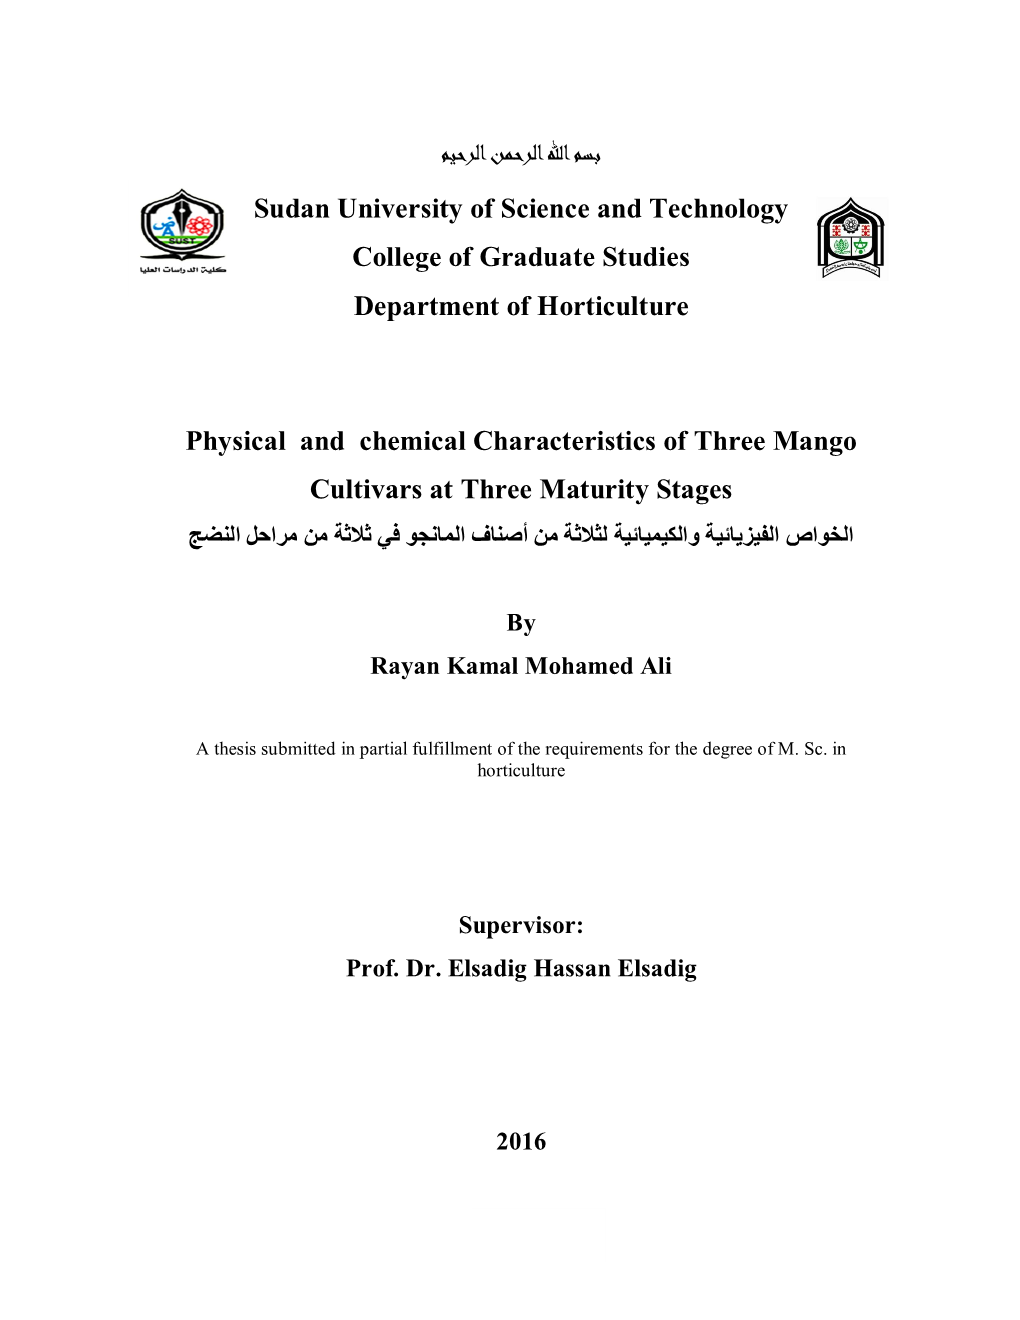 Sudan University of Science and Technology College of Graduate Studies